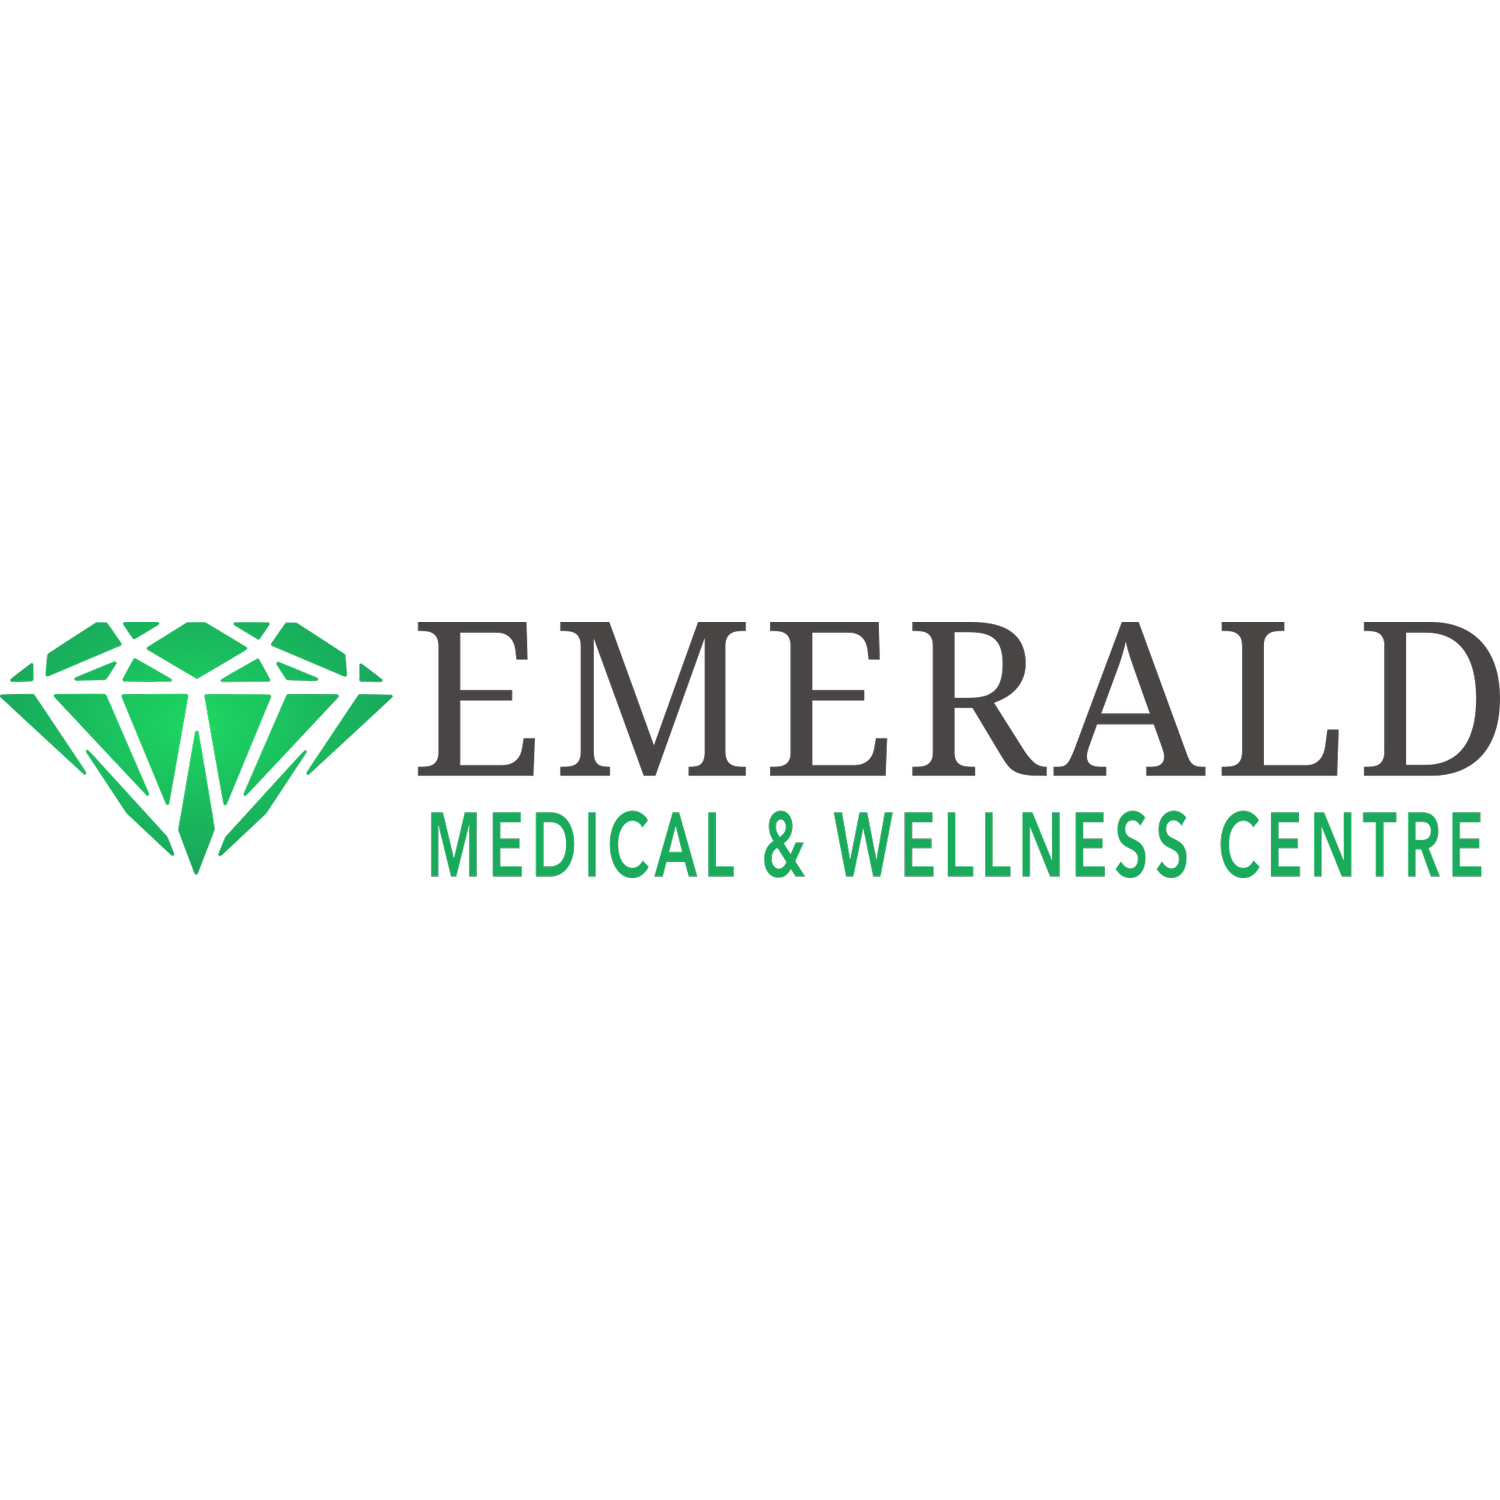 Emerald Wellness and Medical Centre